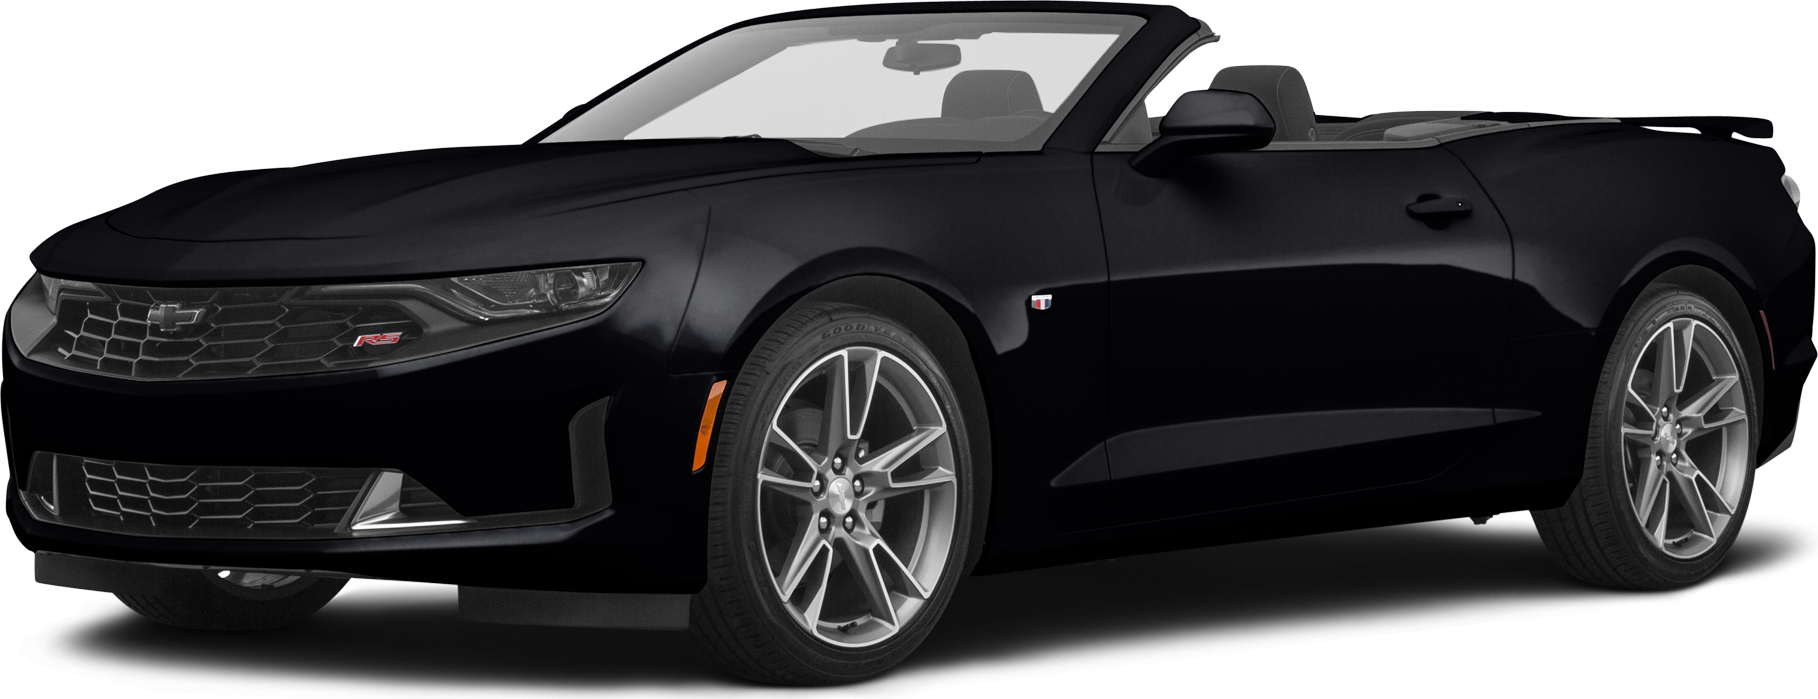 2020 Chevrolet Camaro Price Value Ratings And Reviews Kelley Blue Book